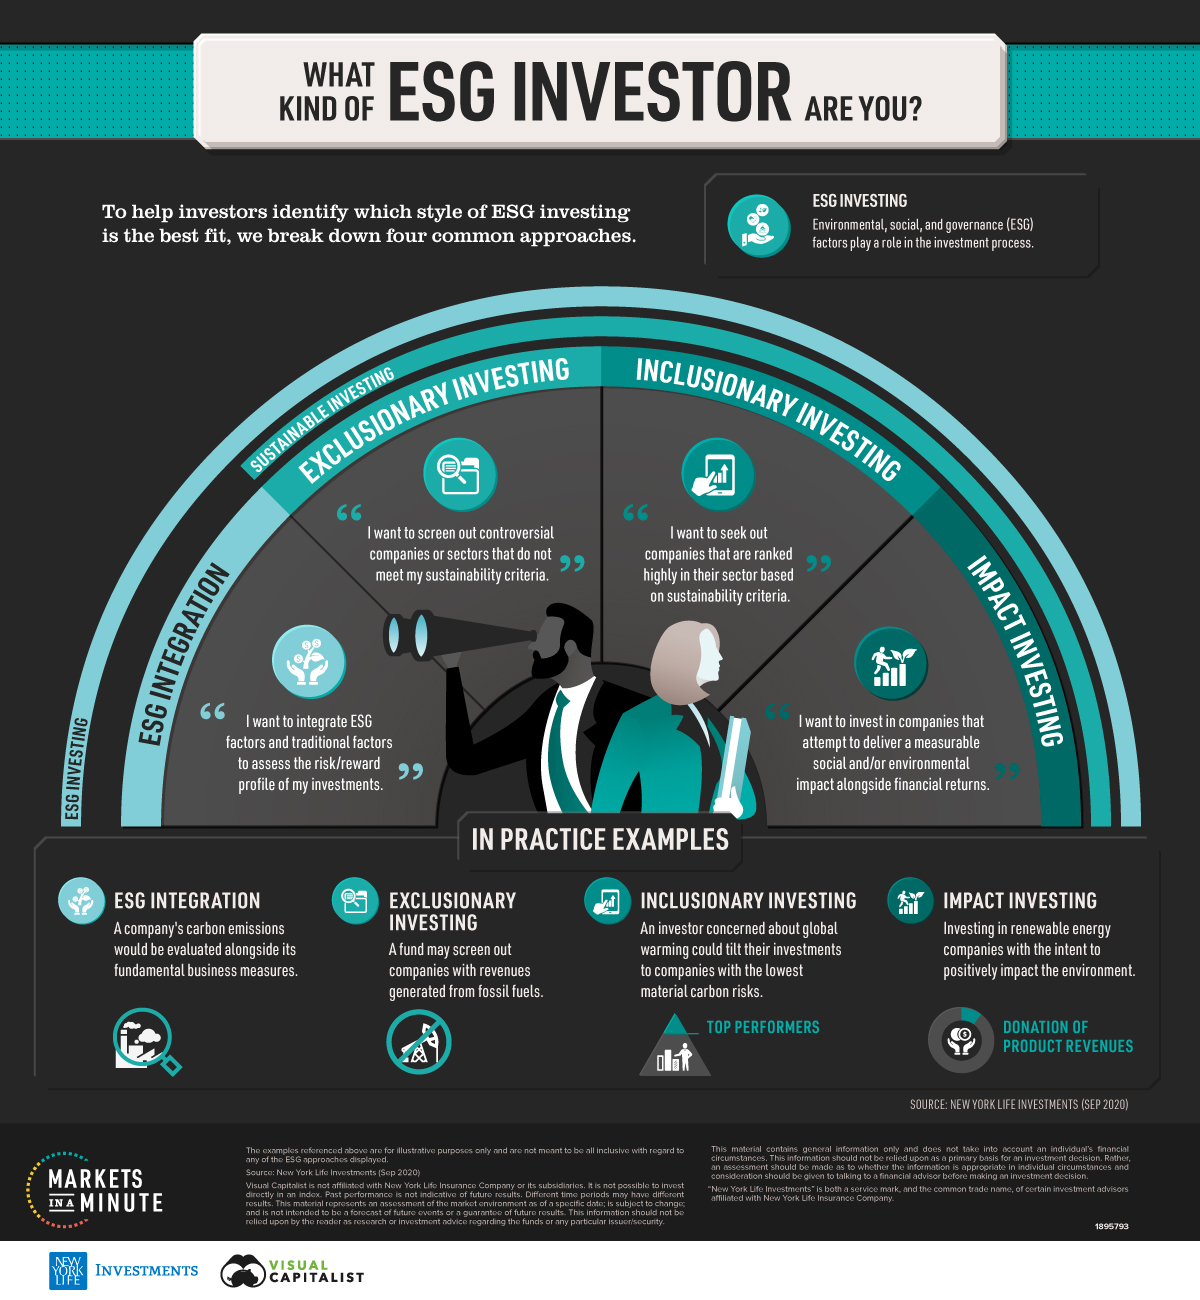 Esg investing overview how high will the us dollar go